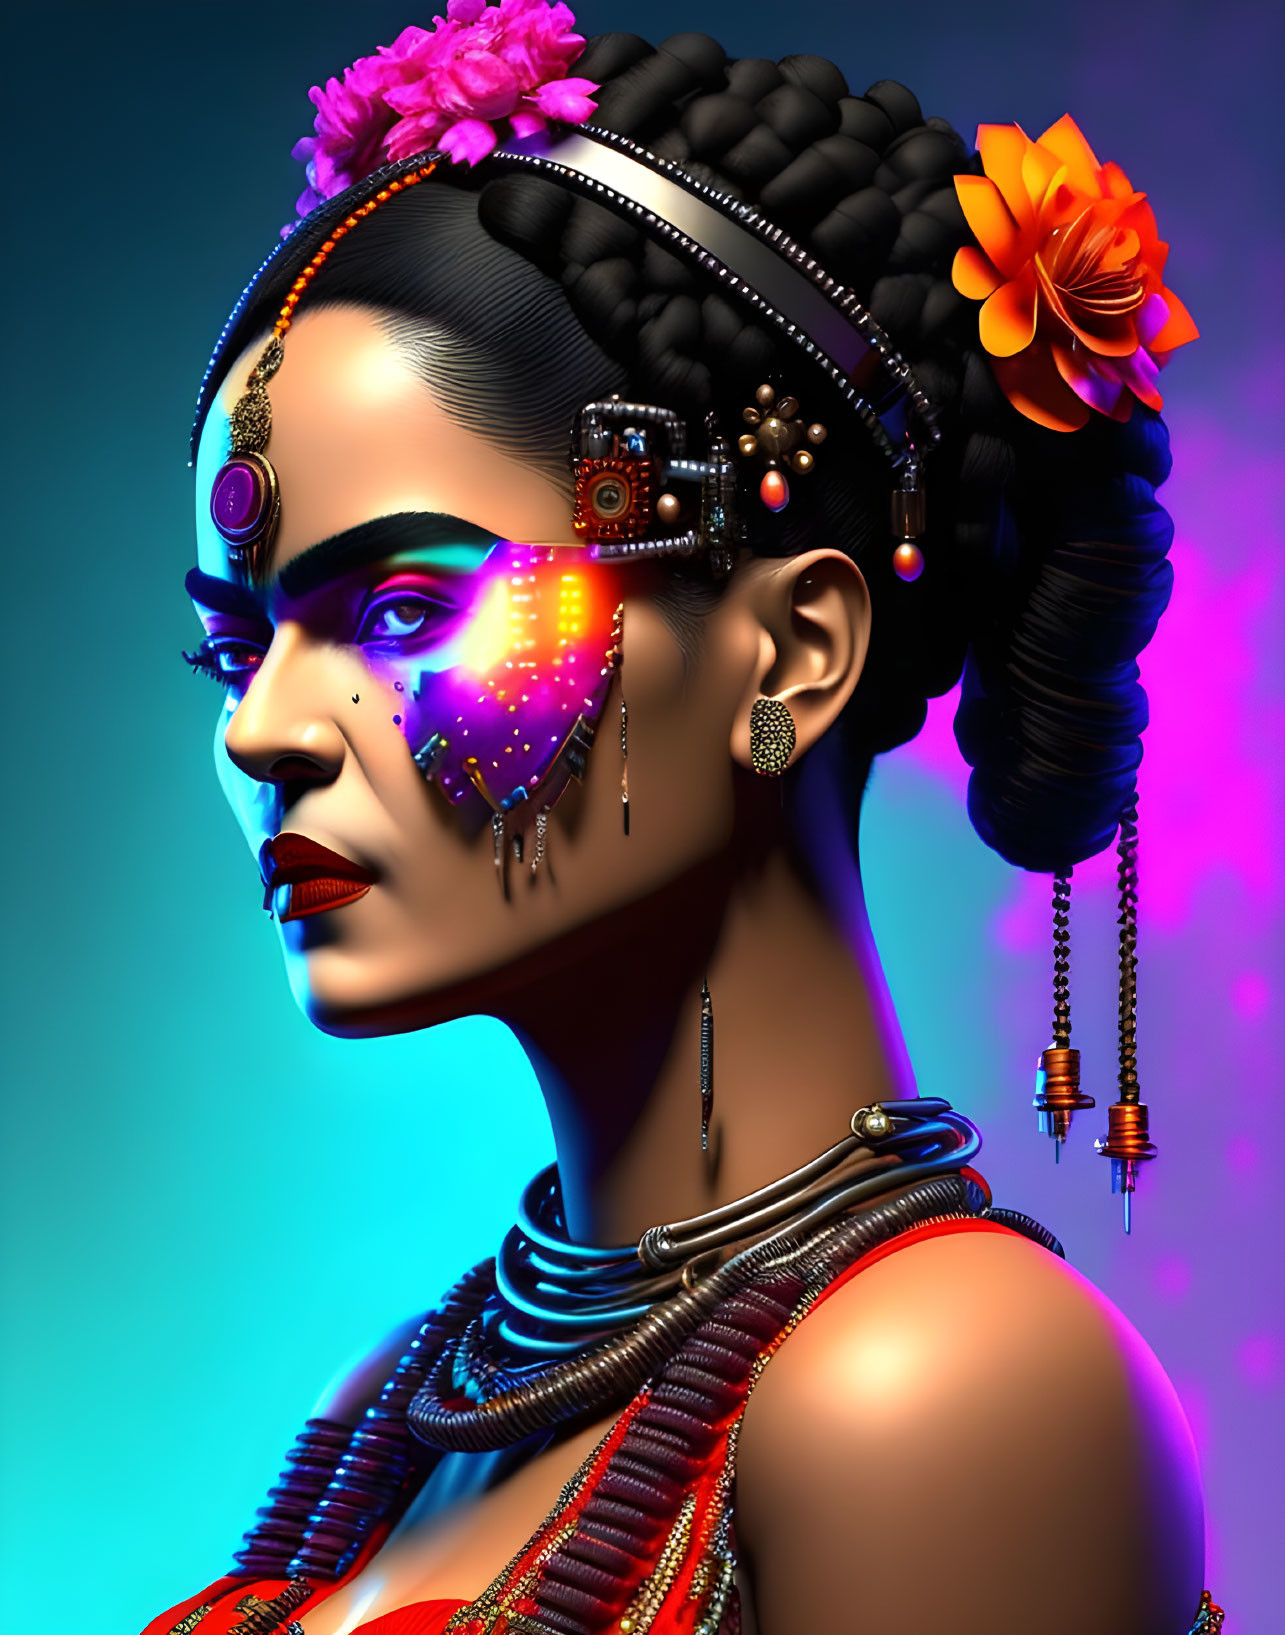 Futuristic tribal makeup woman with elaborate braid and jewelry